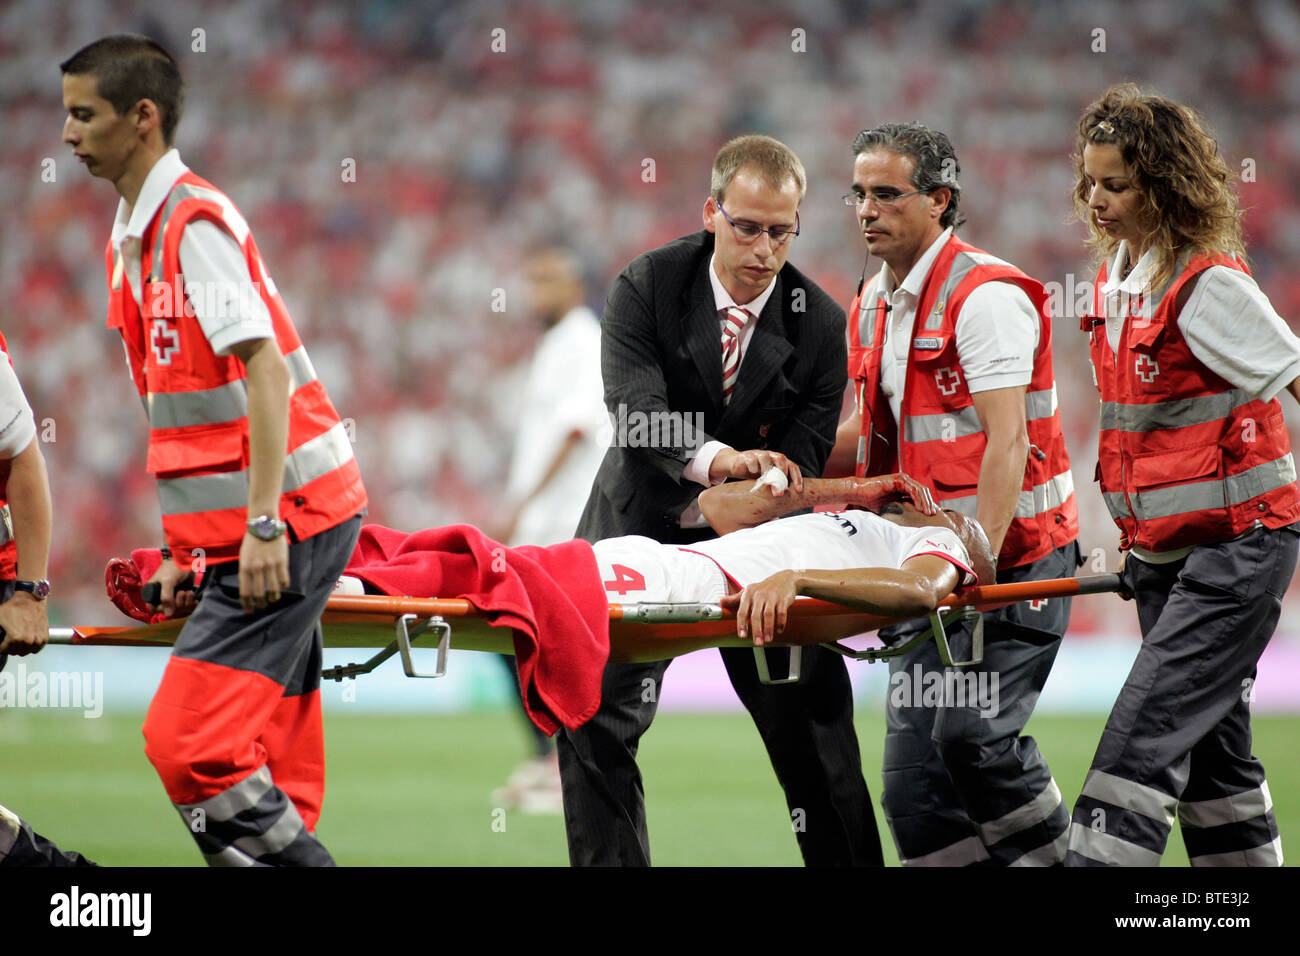 Daniel Alves from FC Seville injured during a football match, Madrid, Spain Stock Photo